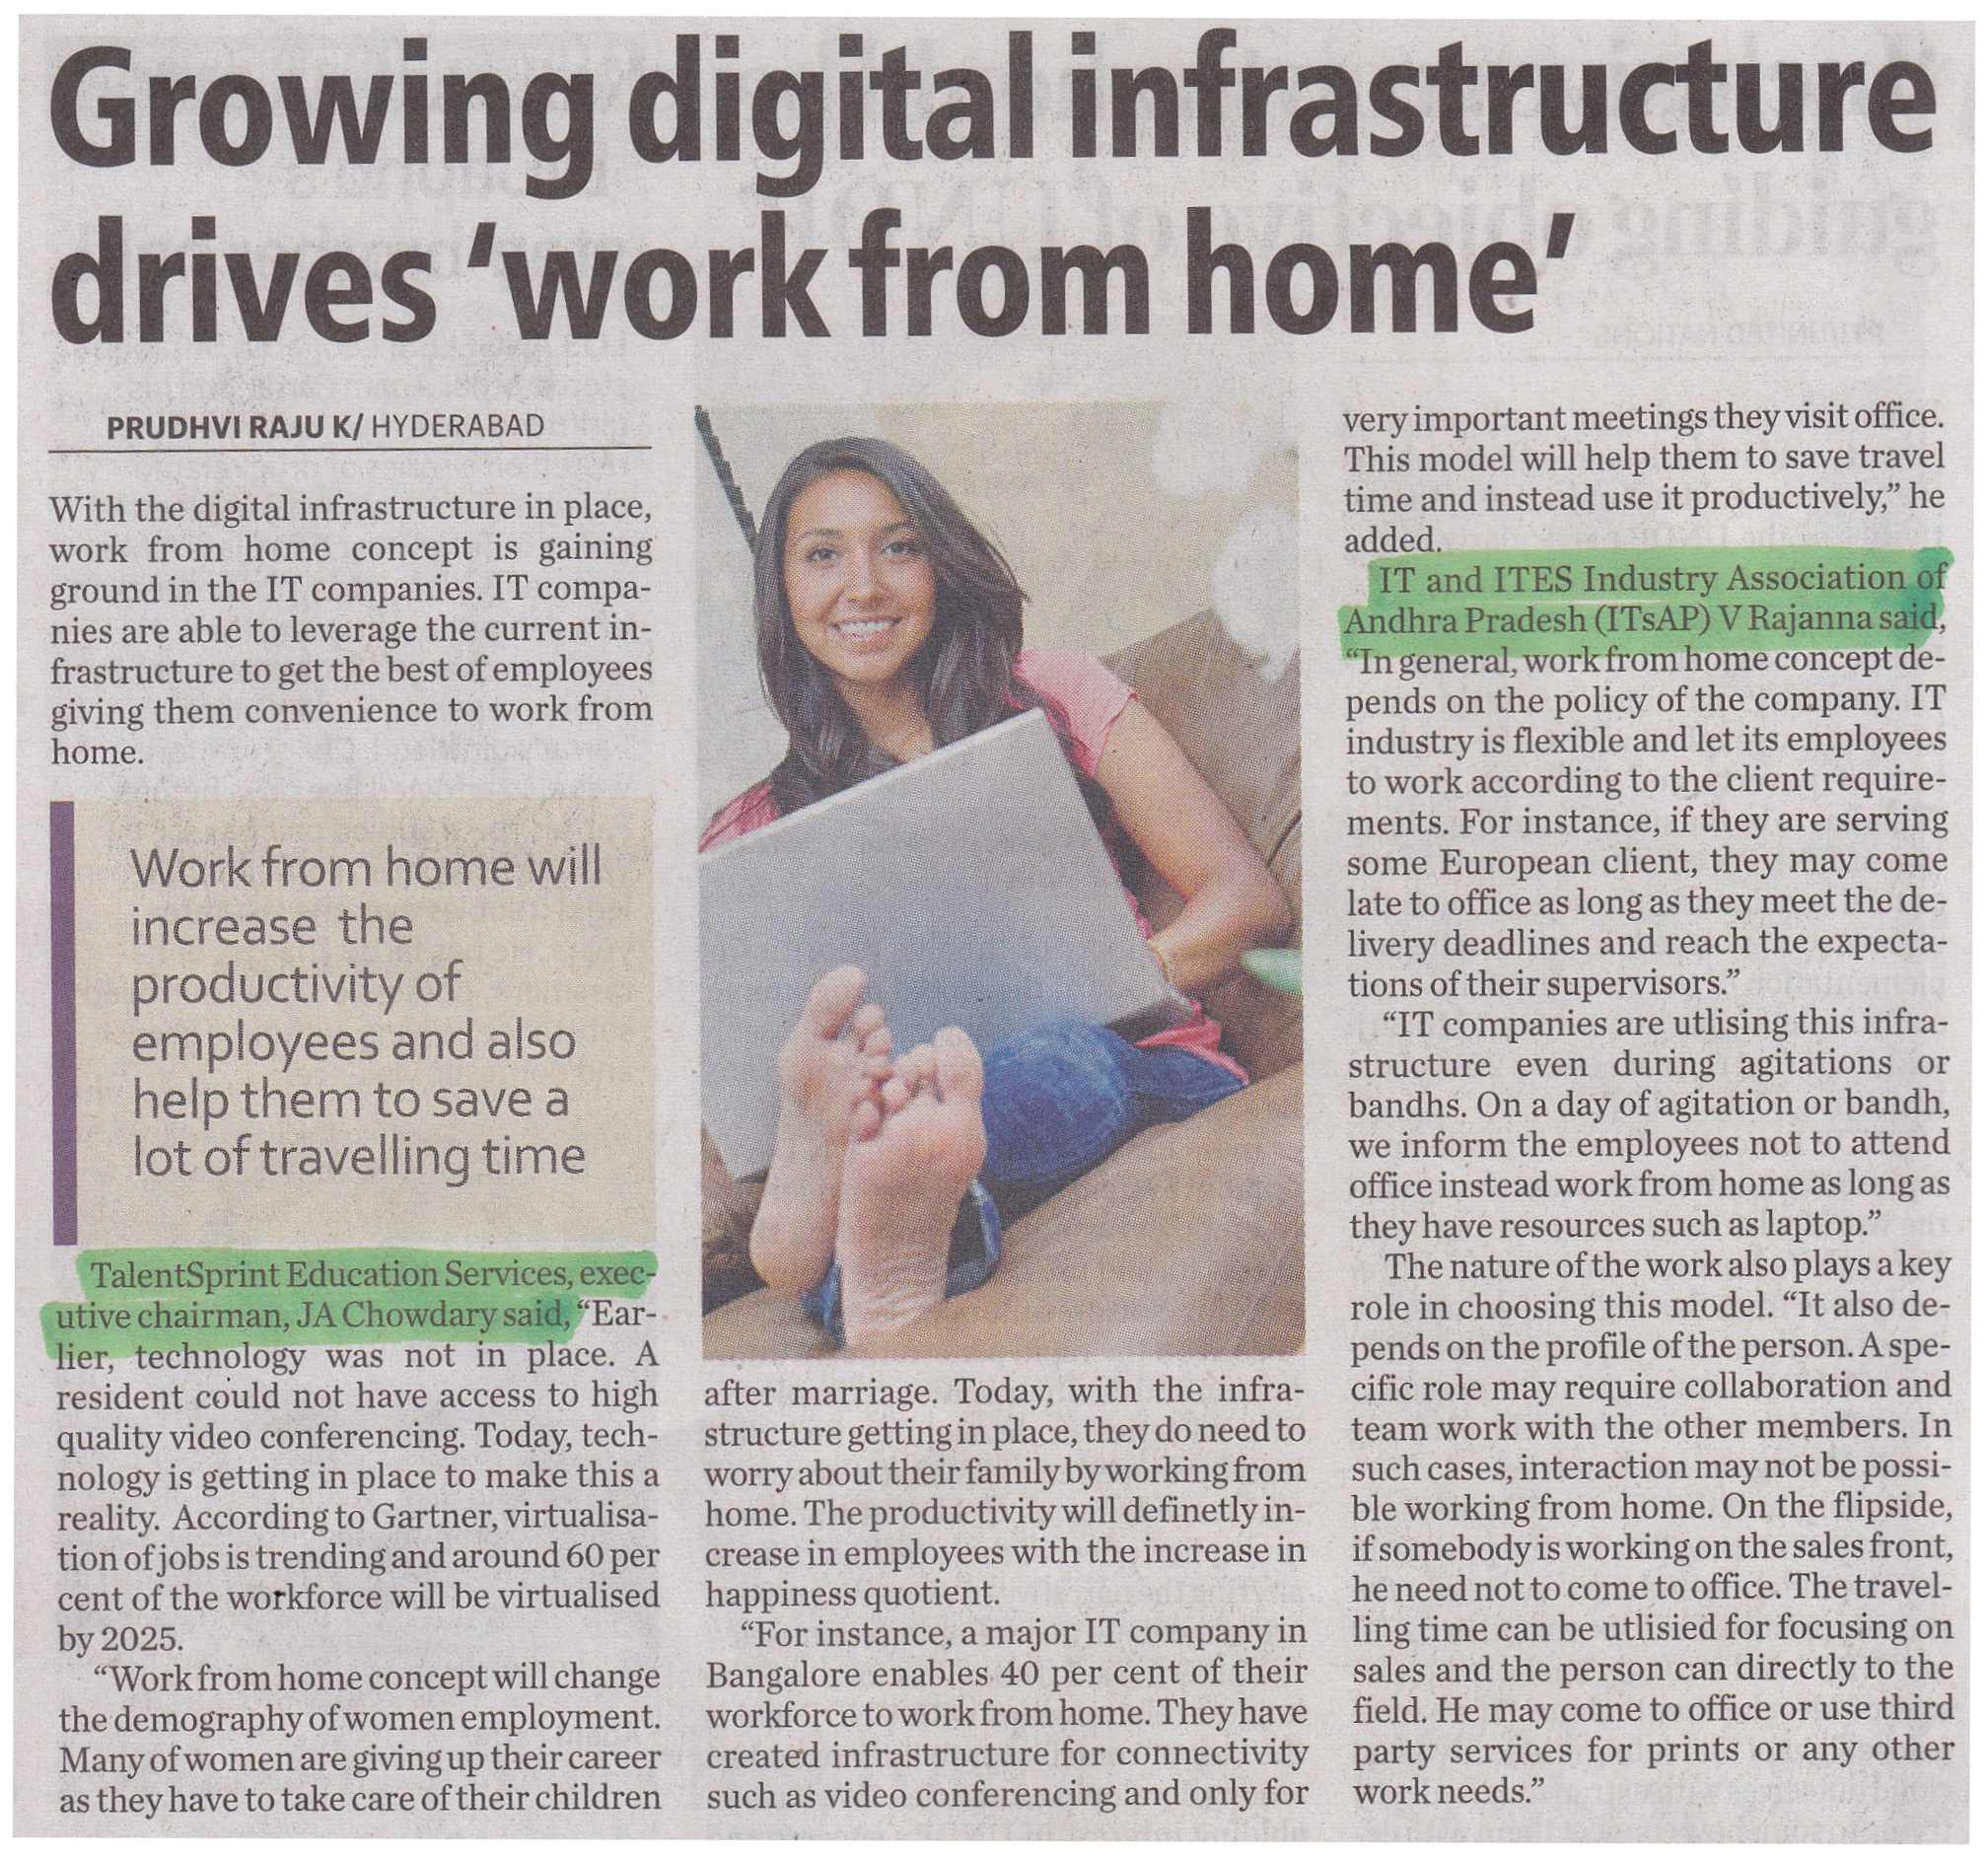 Growing digital infrastructure drives 'work from home'